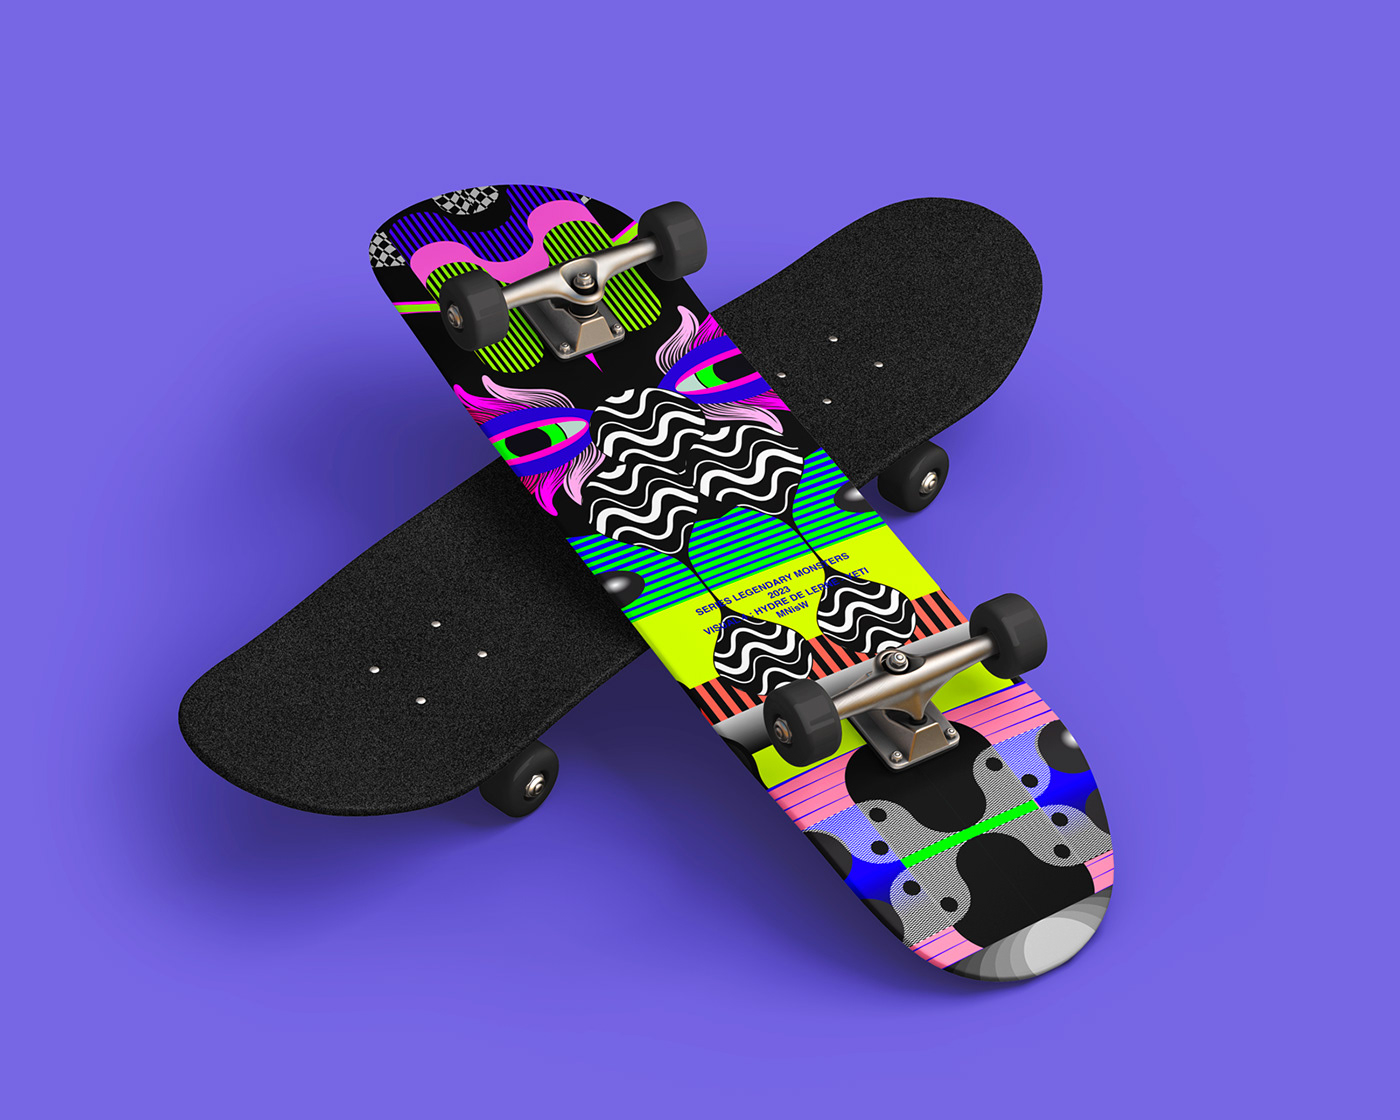 Skateboard designed with an illustration, a graphic composition created by My Name is Wendy